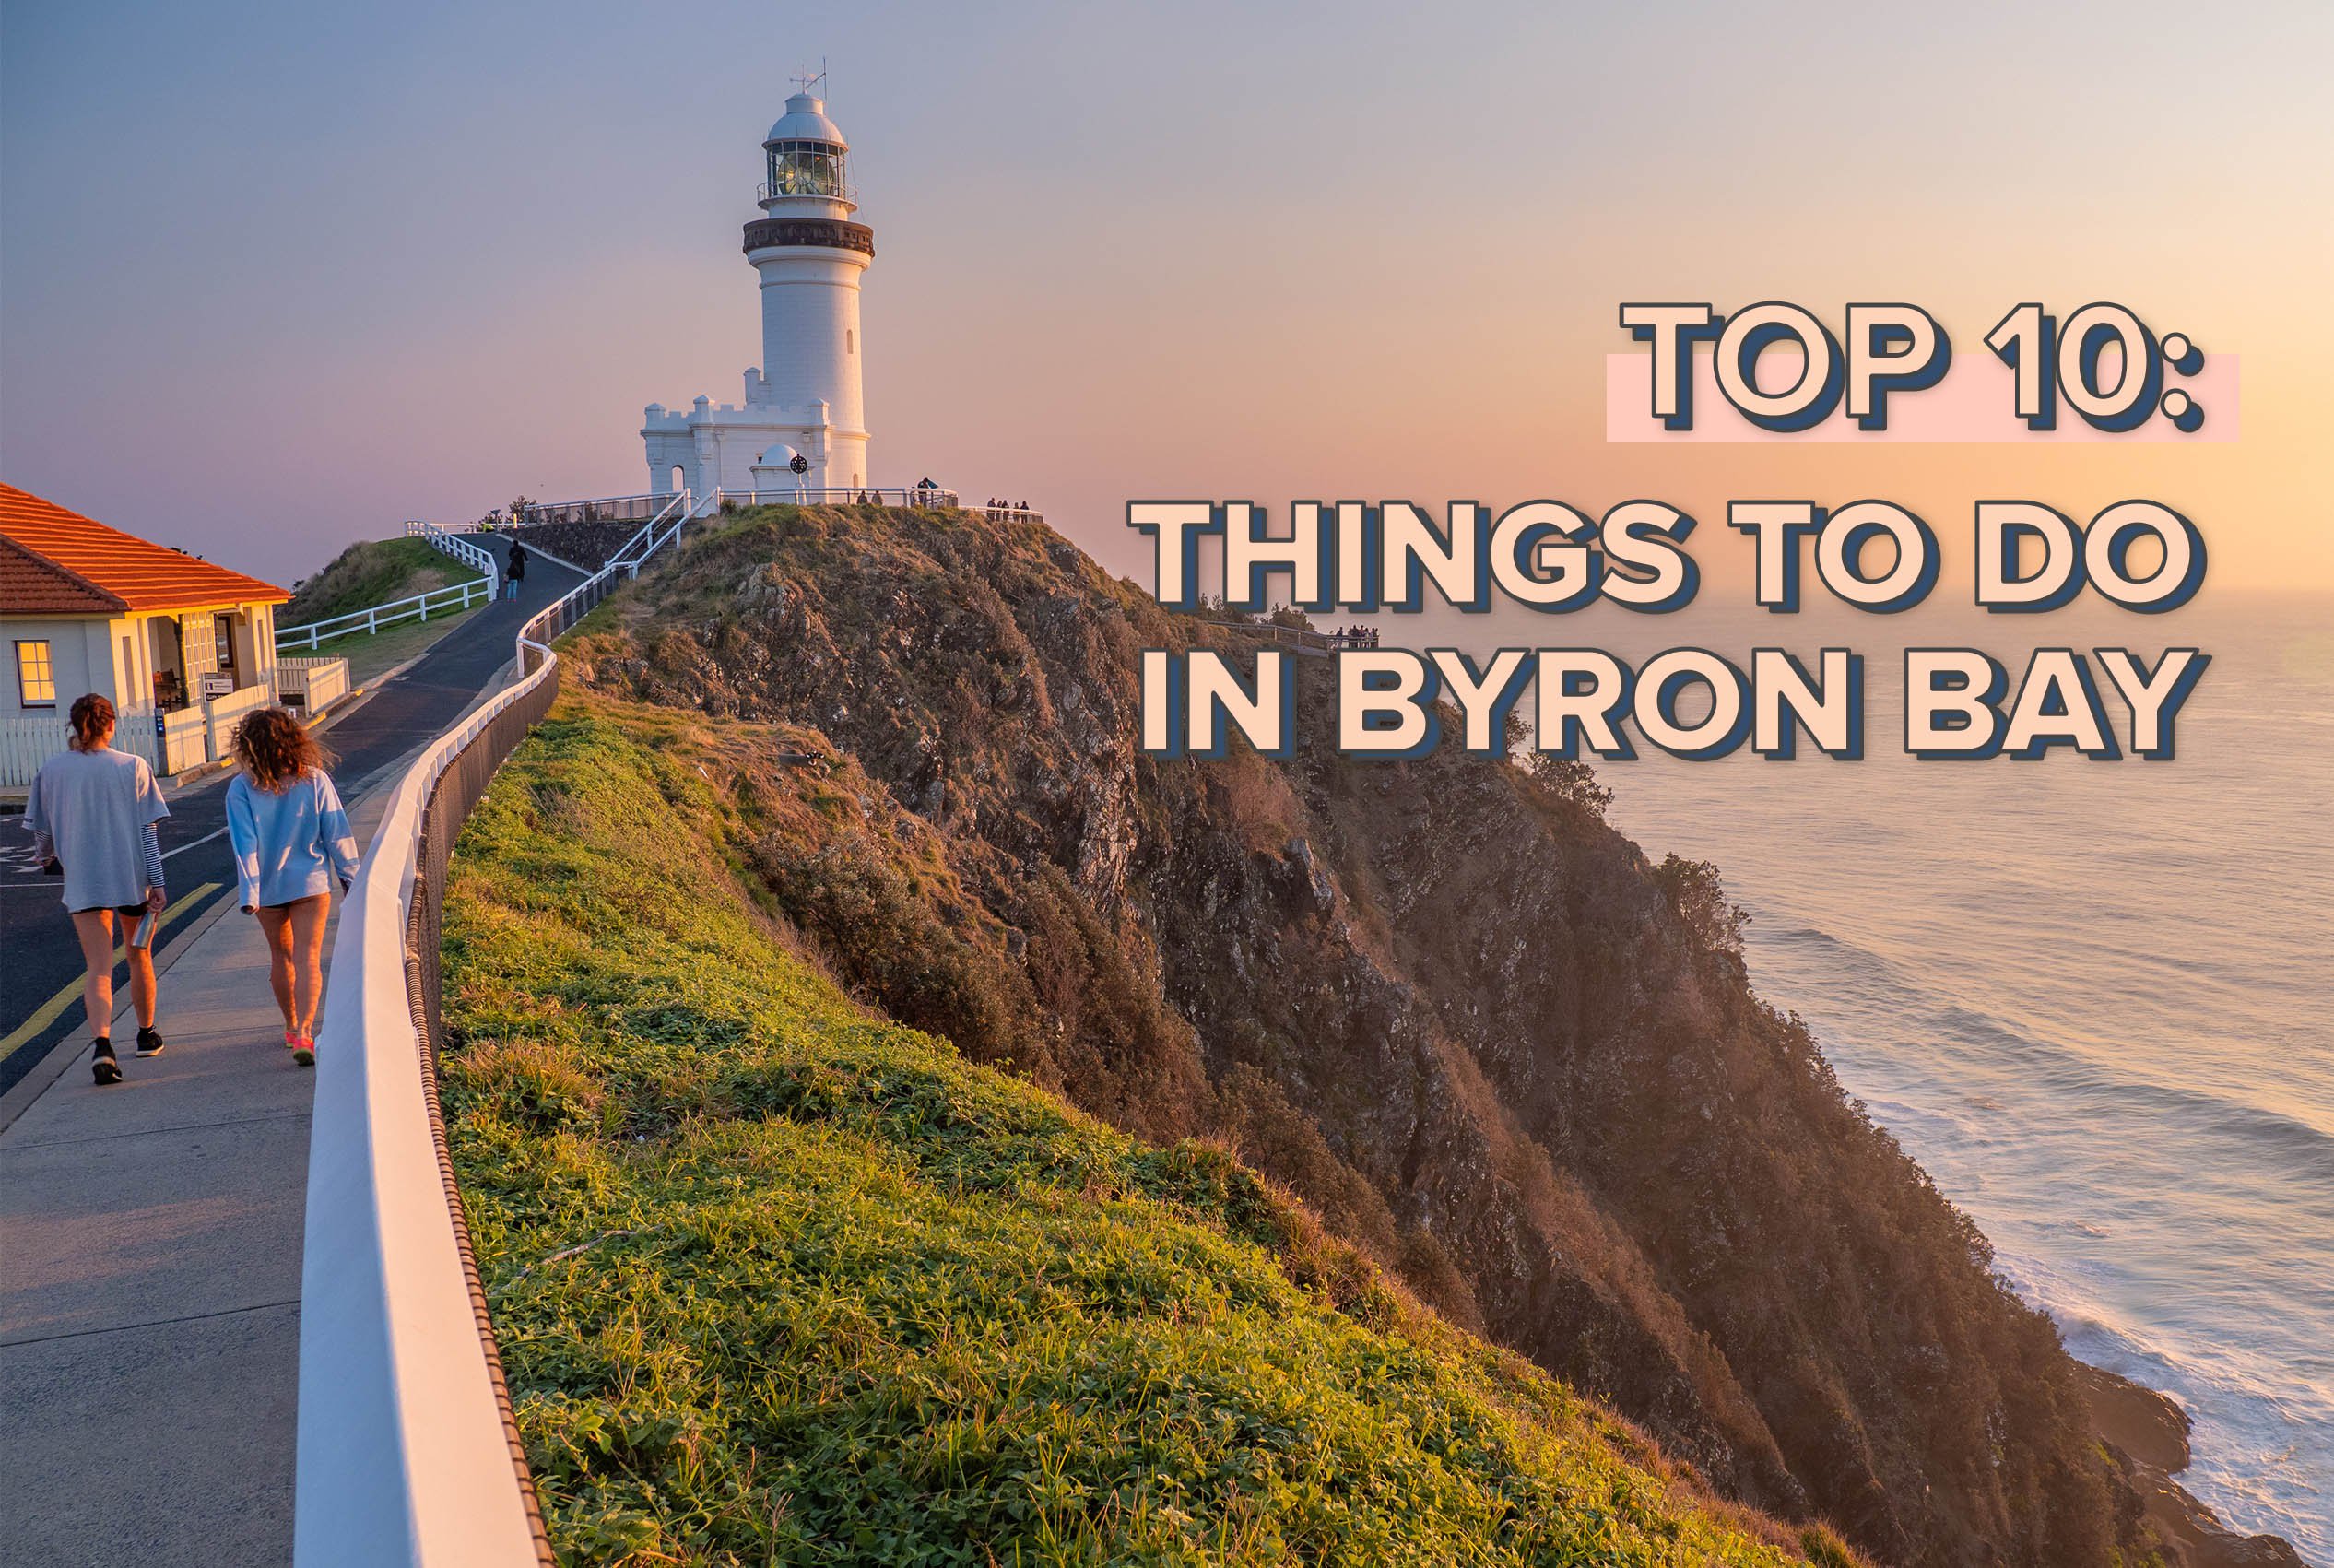 Top 10 Things To Do In Byron Bay